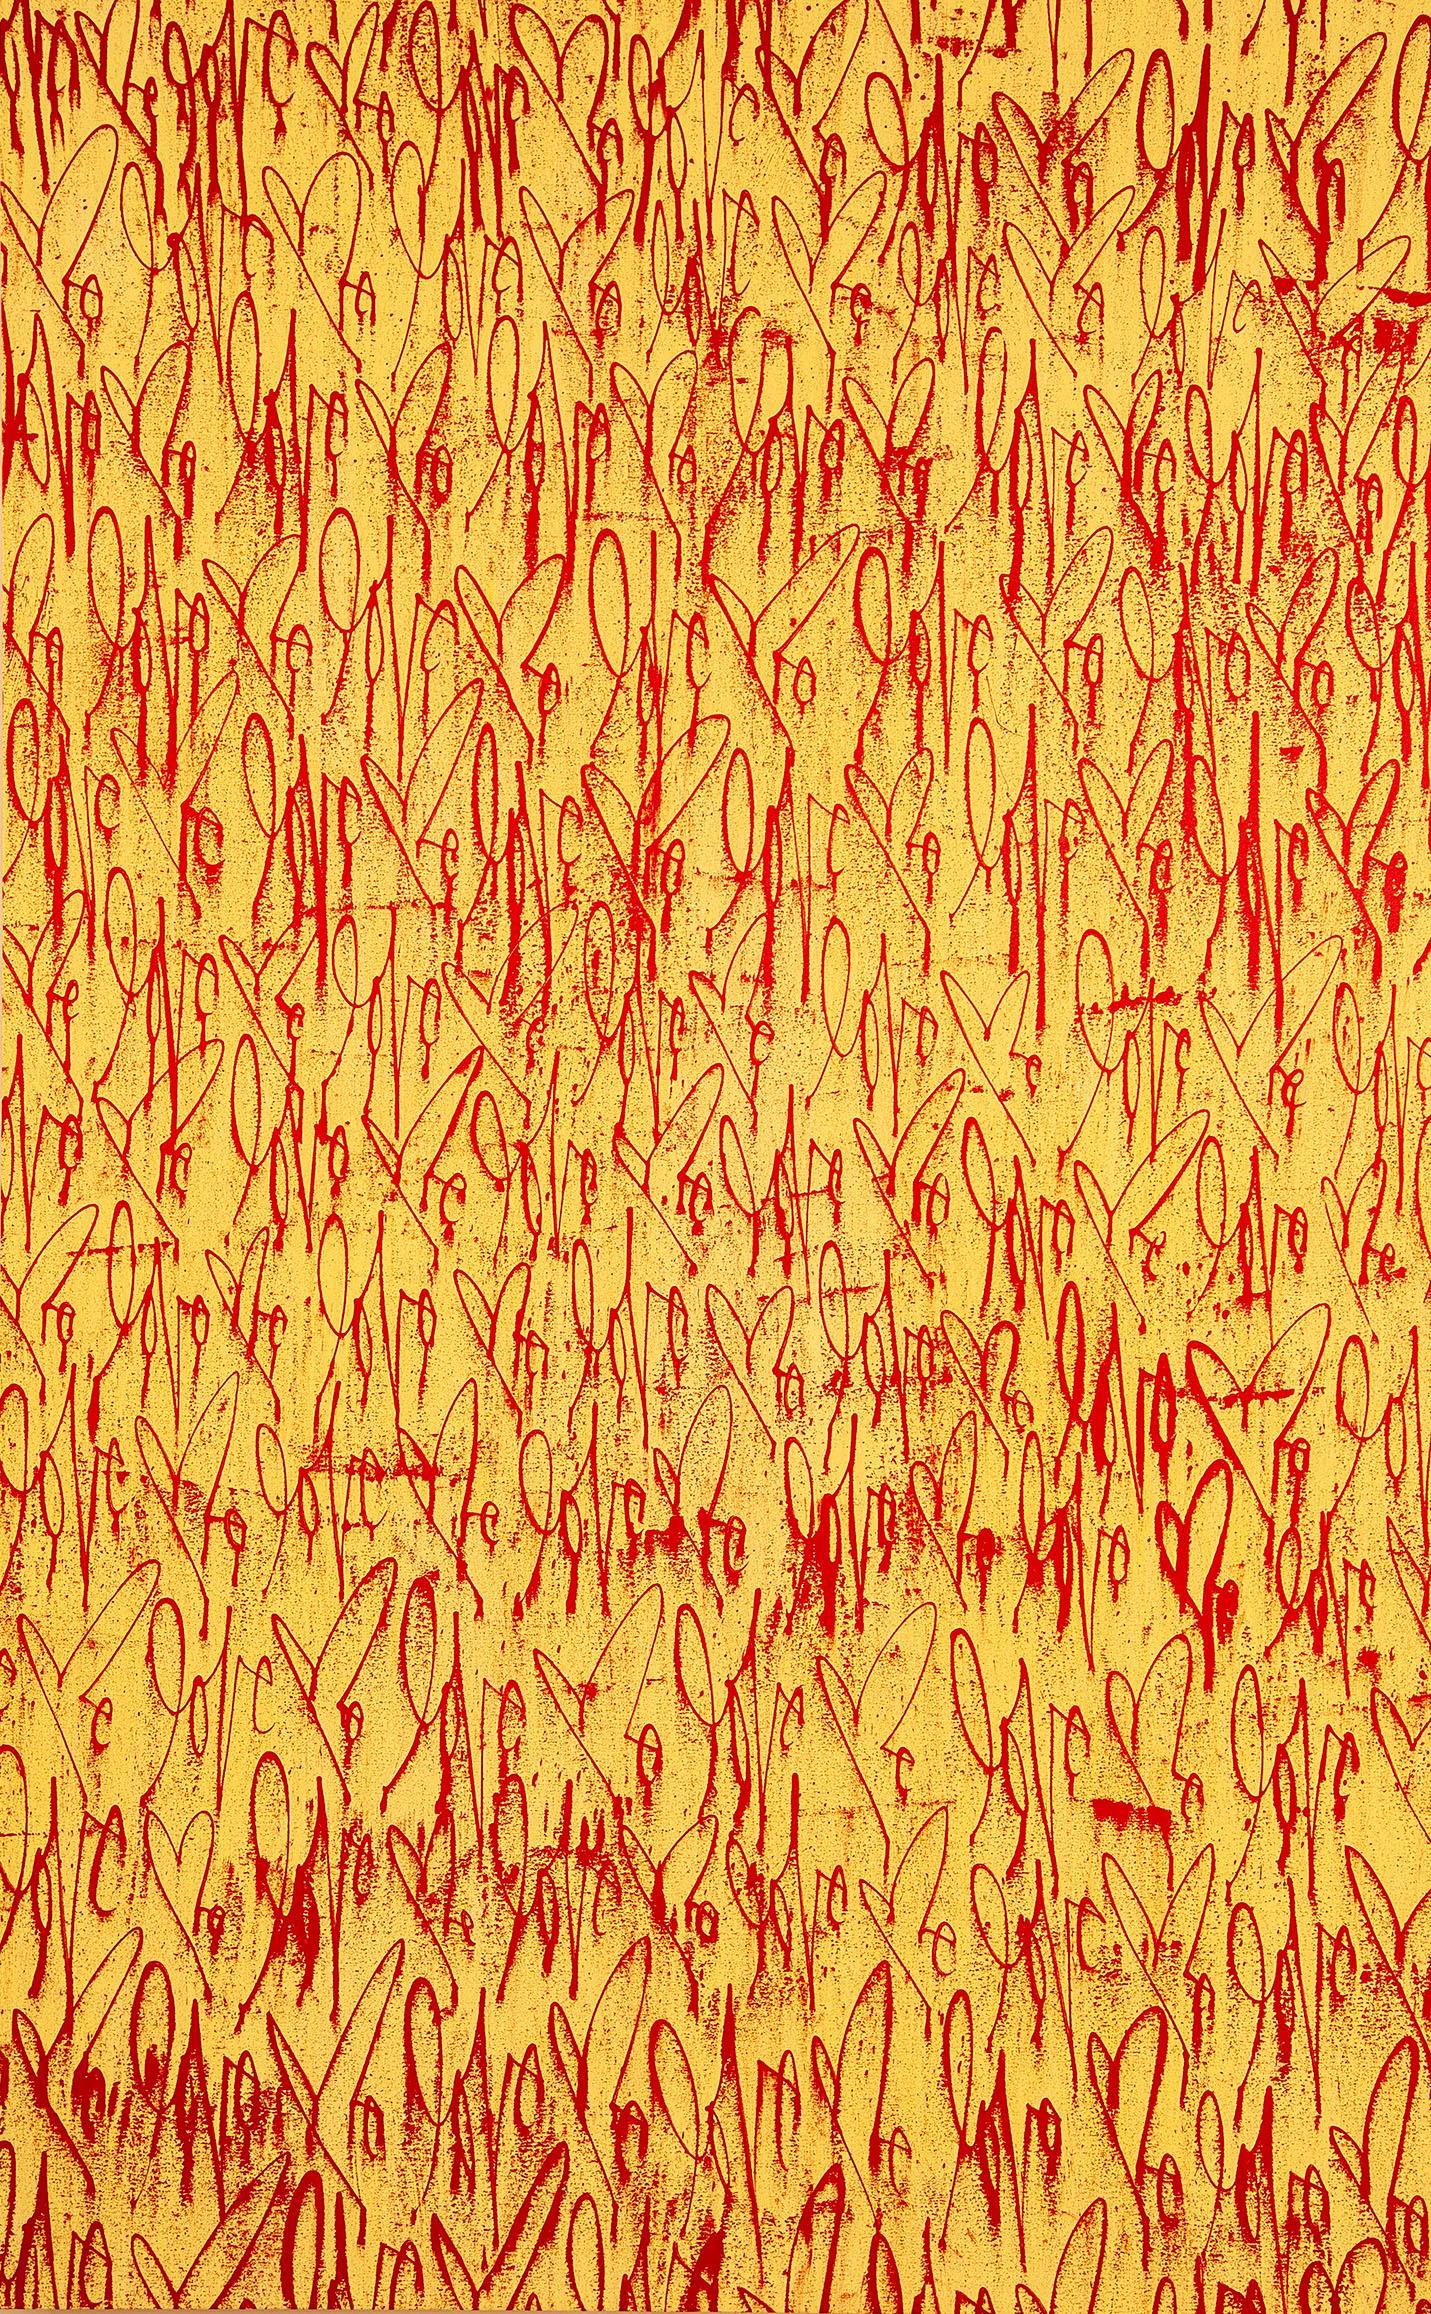 Curtis Kulig Love Me on Canvas (Yellow and Red) 